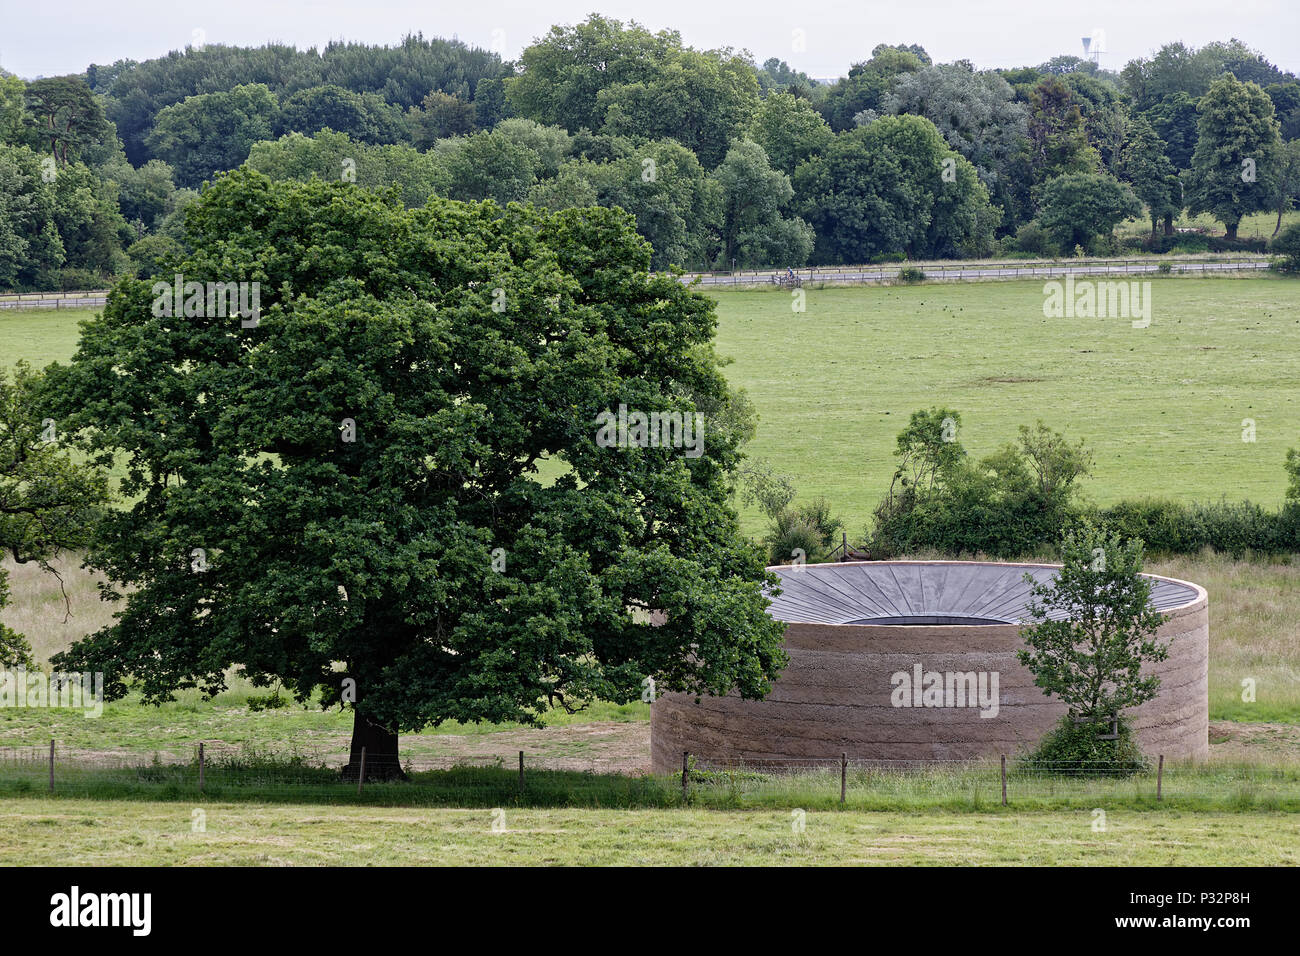 Sunday 17th June 2018. Runnymede Meadows, Surrey, England.'Writ In Water' designed by artist Mark Wallinger to 'reflect upon the founding principles of democracy'. Created in collaboration with Studio Octopi it opened to the public yesterday on16th June & sits on public 'land held in common' at Runnymede by the National Trust. Credit: wyrdlight/Alamy Live News Stock Photo